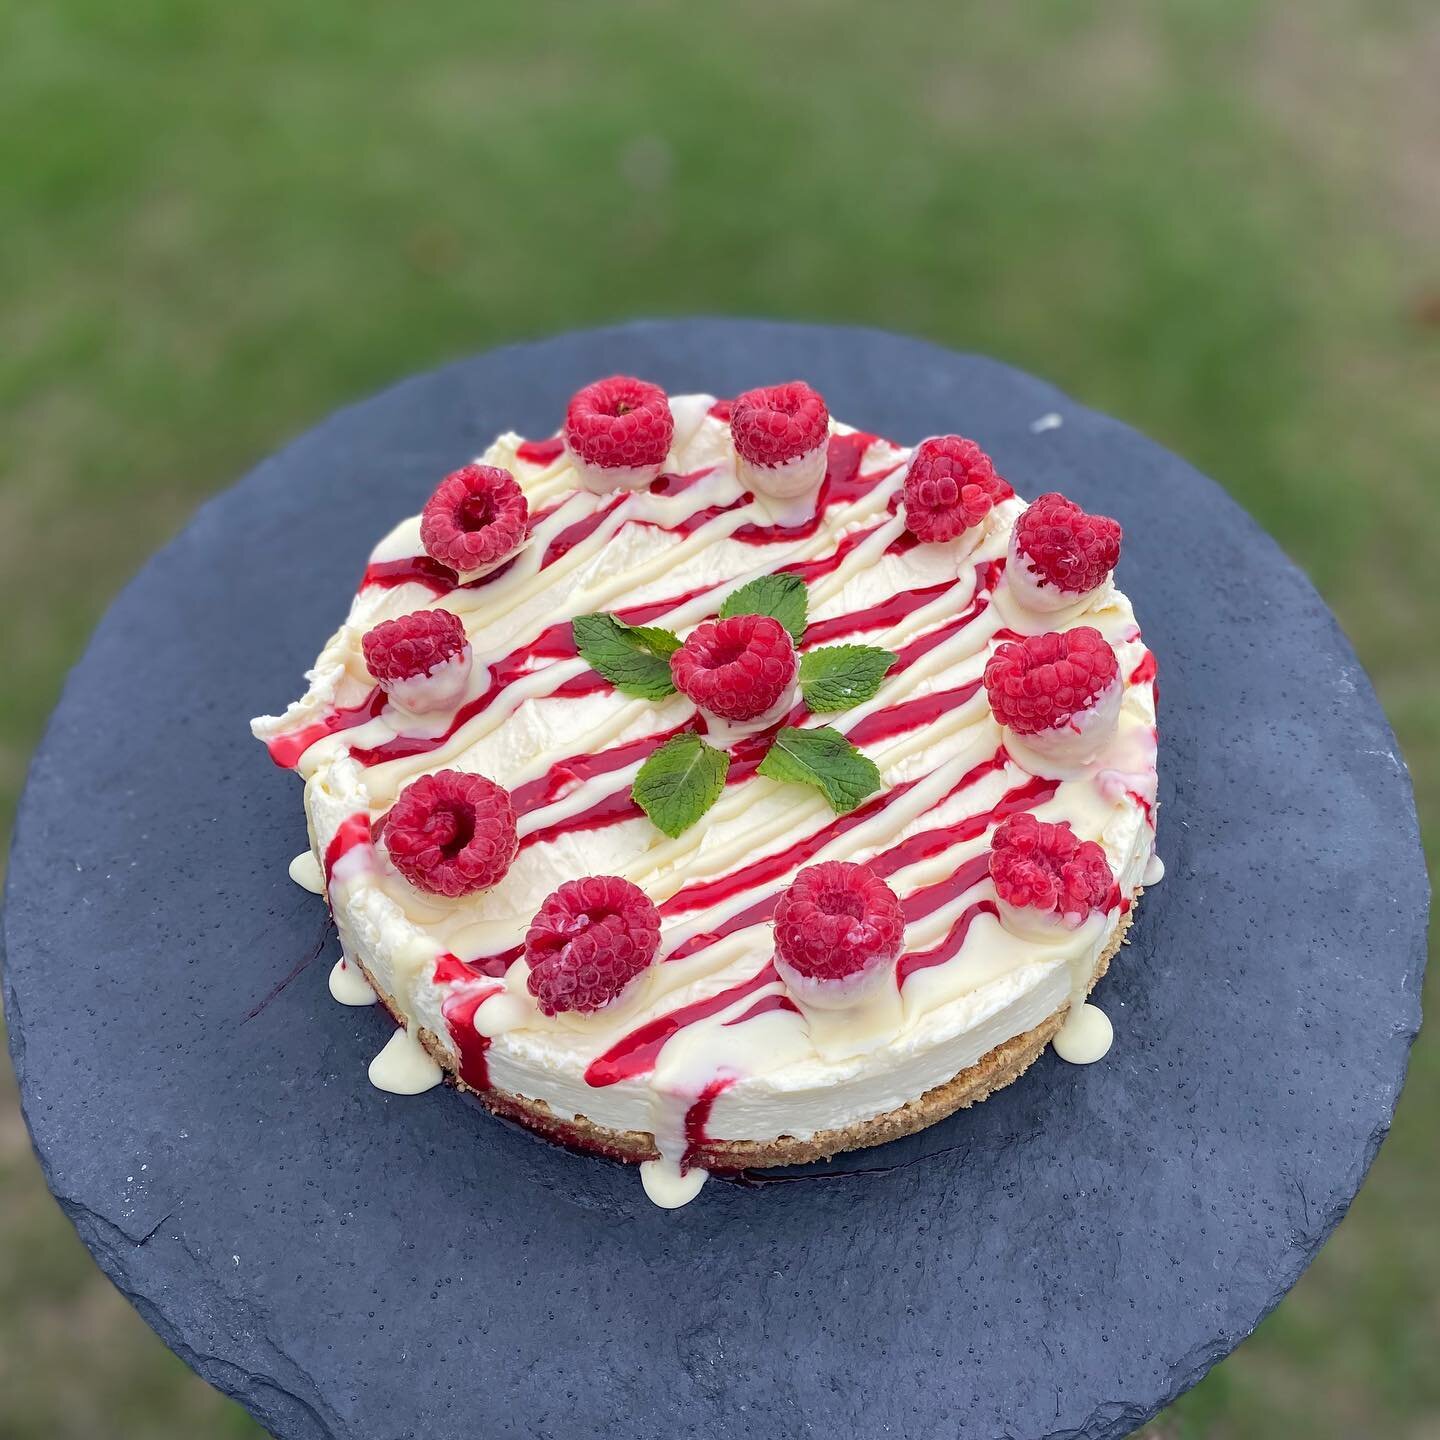 Our homemade white chocolate and raspberry cheesecake! 
Requested for the Essex and Hampshire county cricket.🍬🏏